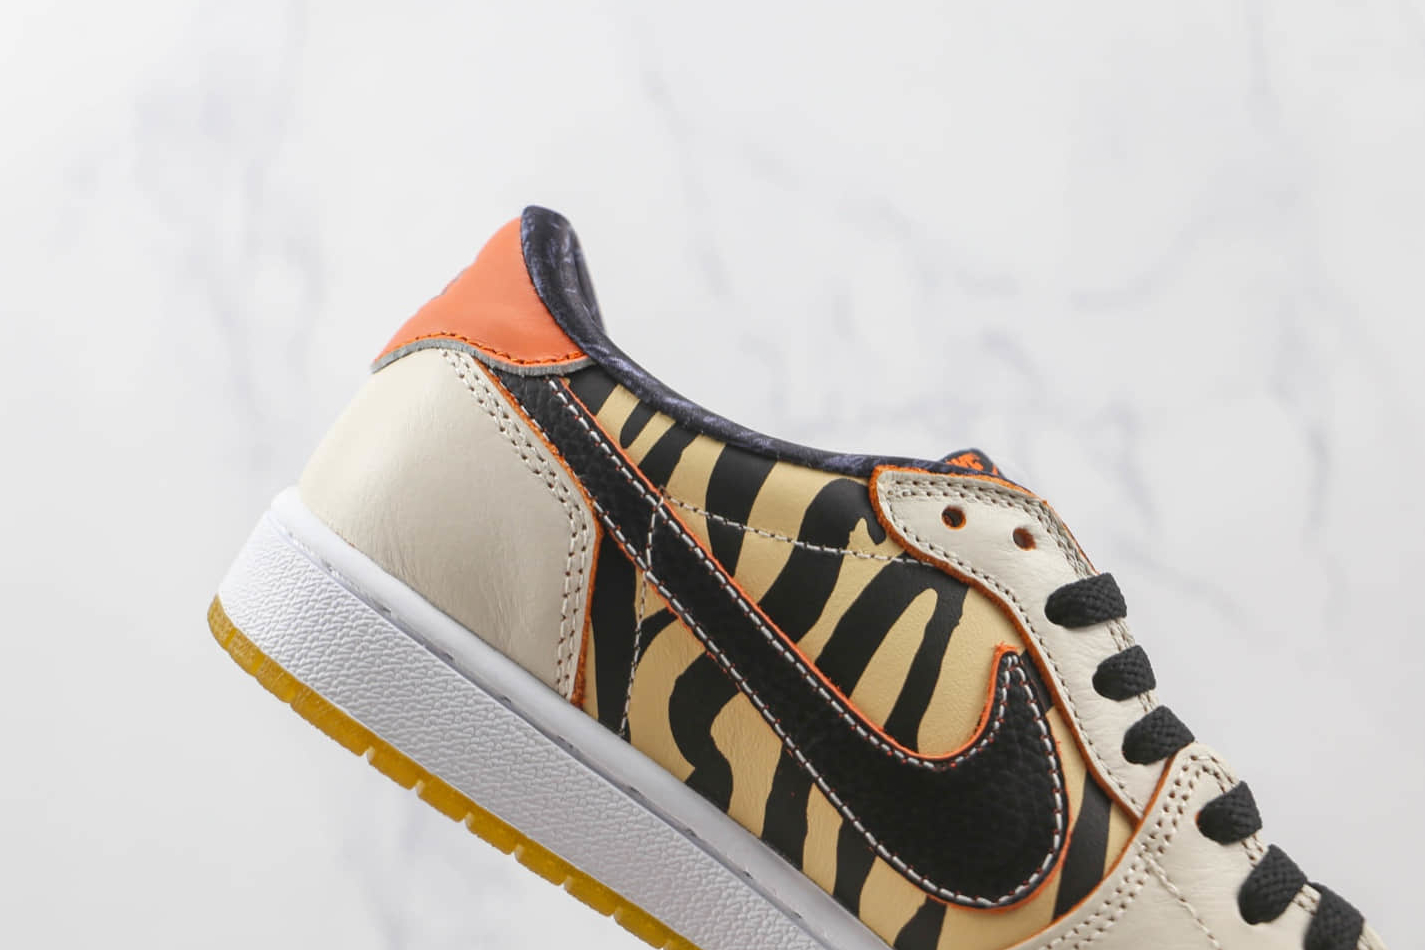 Air Jordan 1 Low OG 'Chinese New Years - Year Of The Tiger' DH6932-100 | Exclusive Limited Edition Sneaker